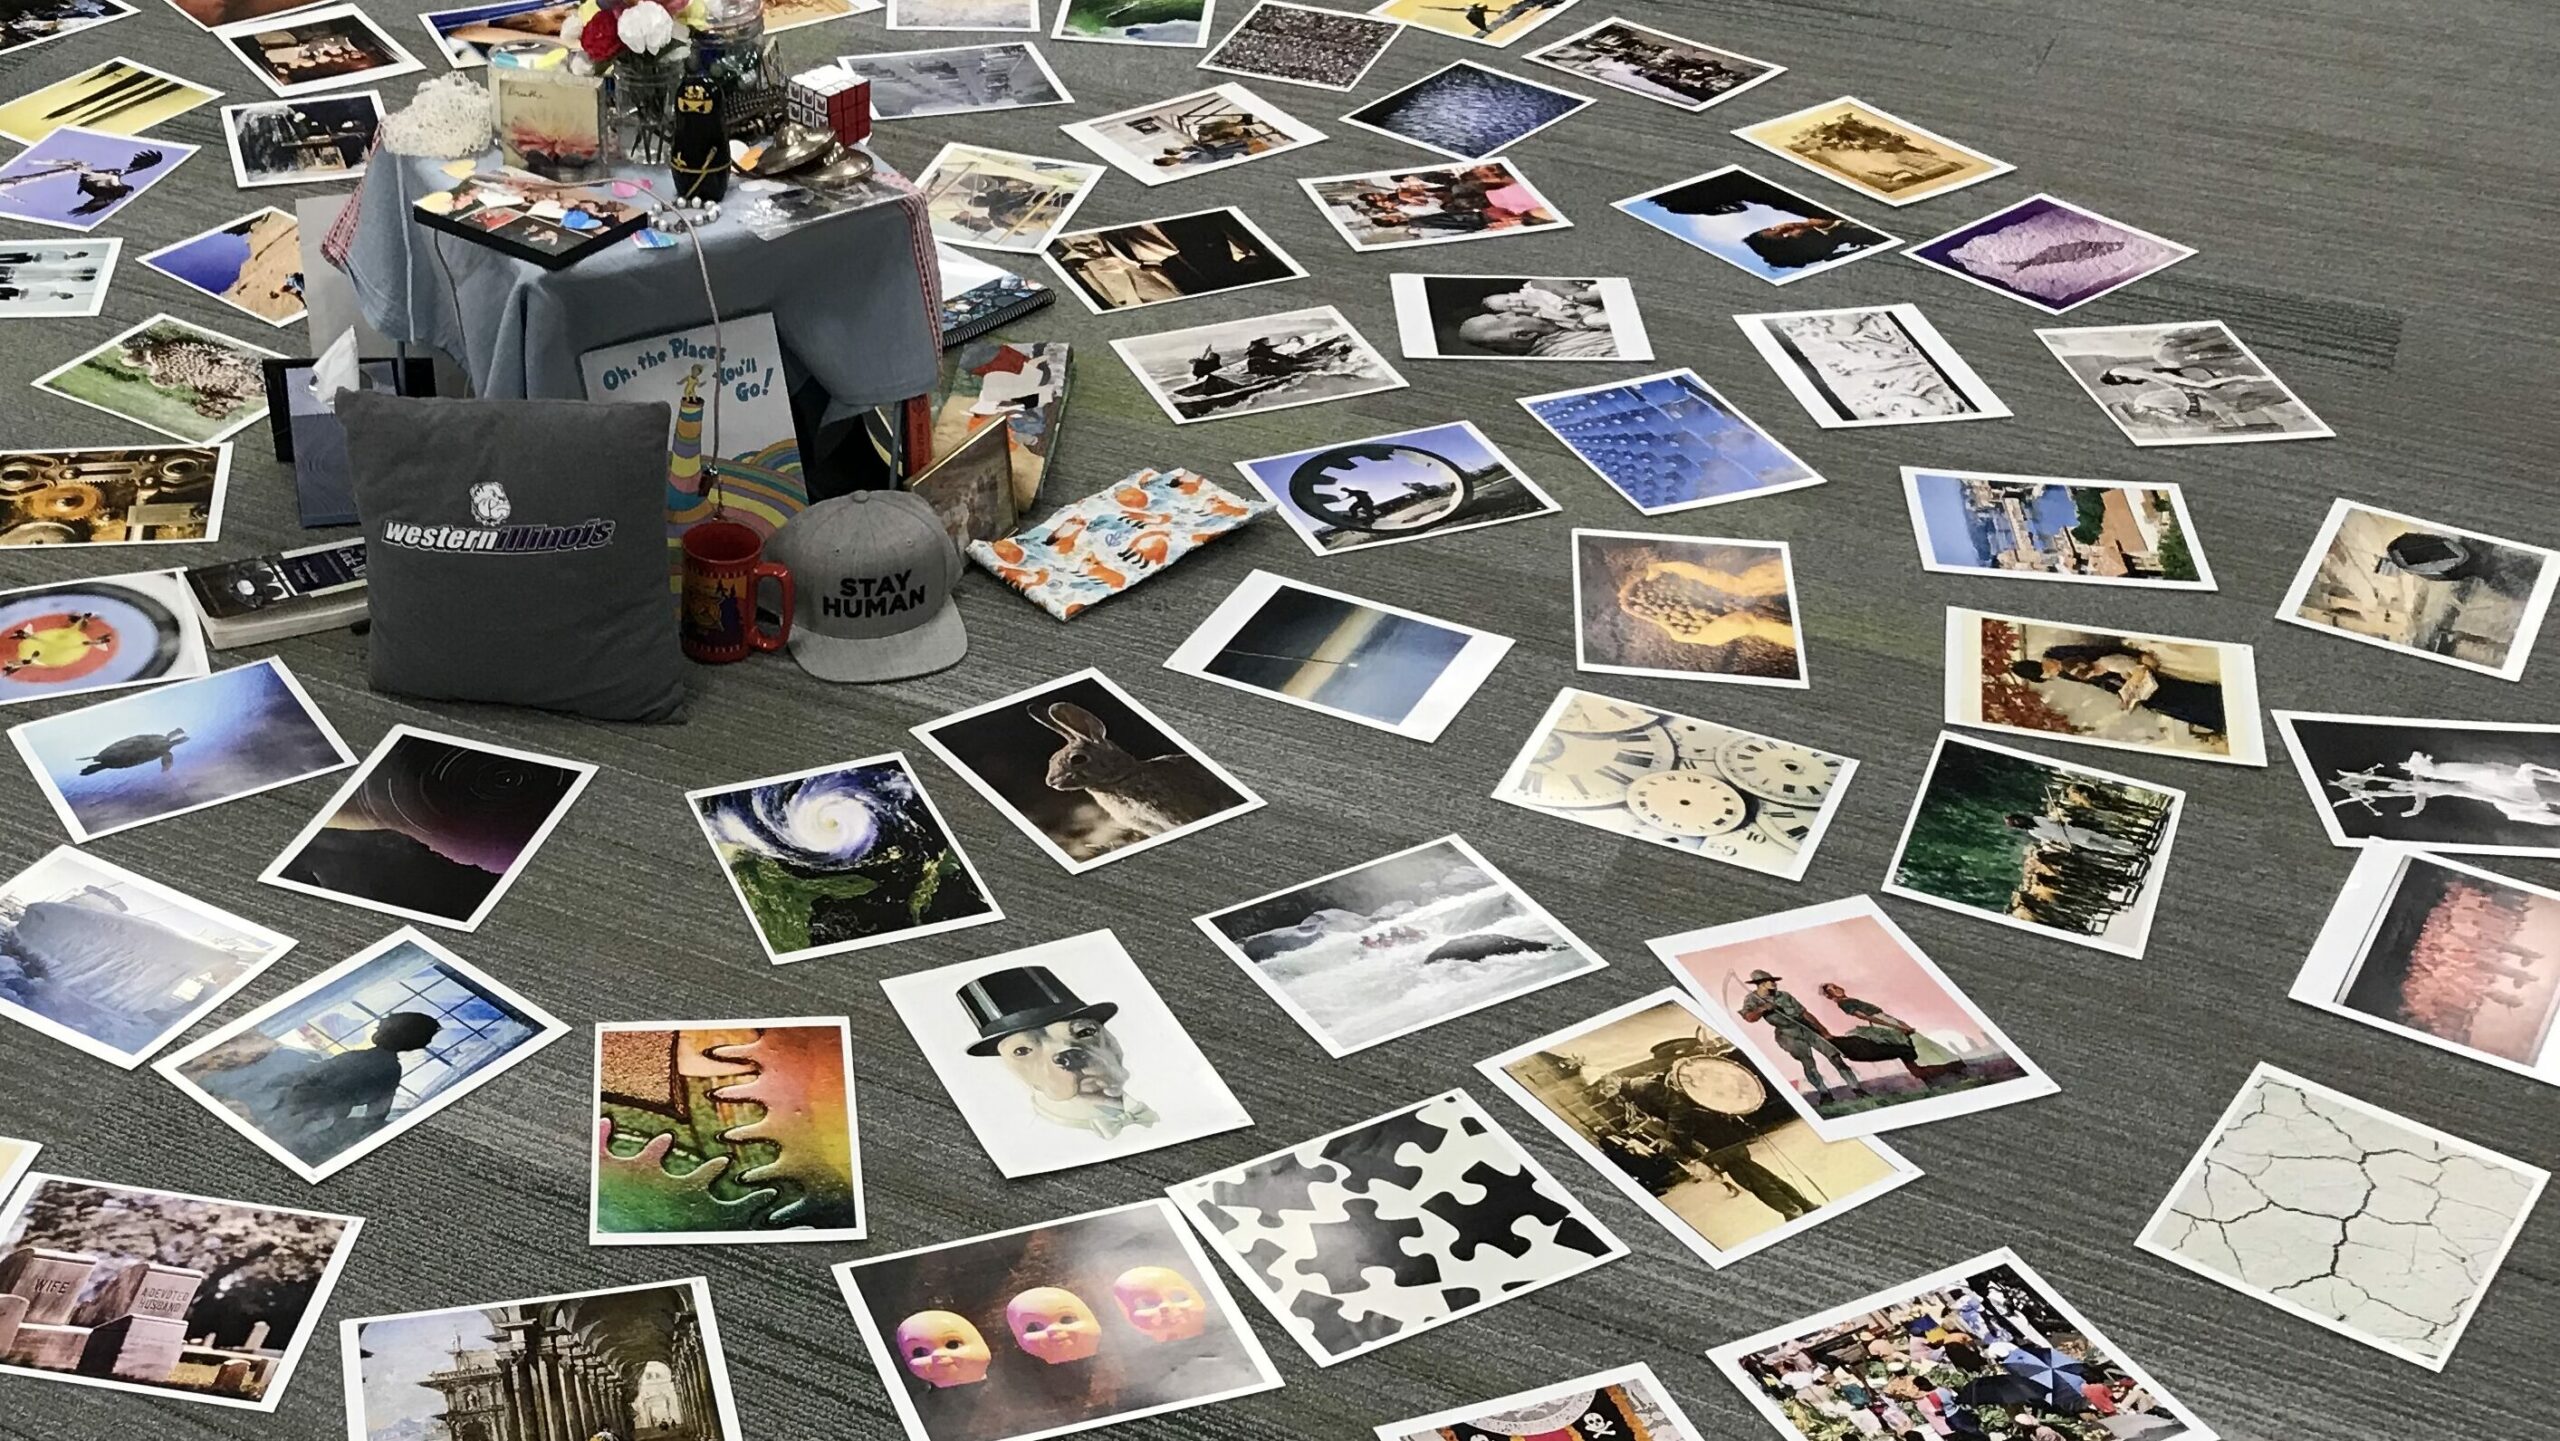 group facilitation activity radial display of varied photographs laid flat on on grey carpet floor including western illinois gear a hat that says stay human and a copy of the dr suess book oh the places you'll go